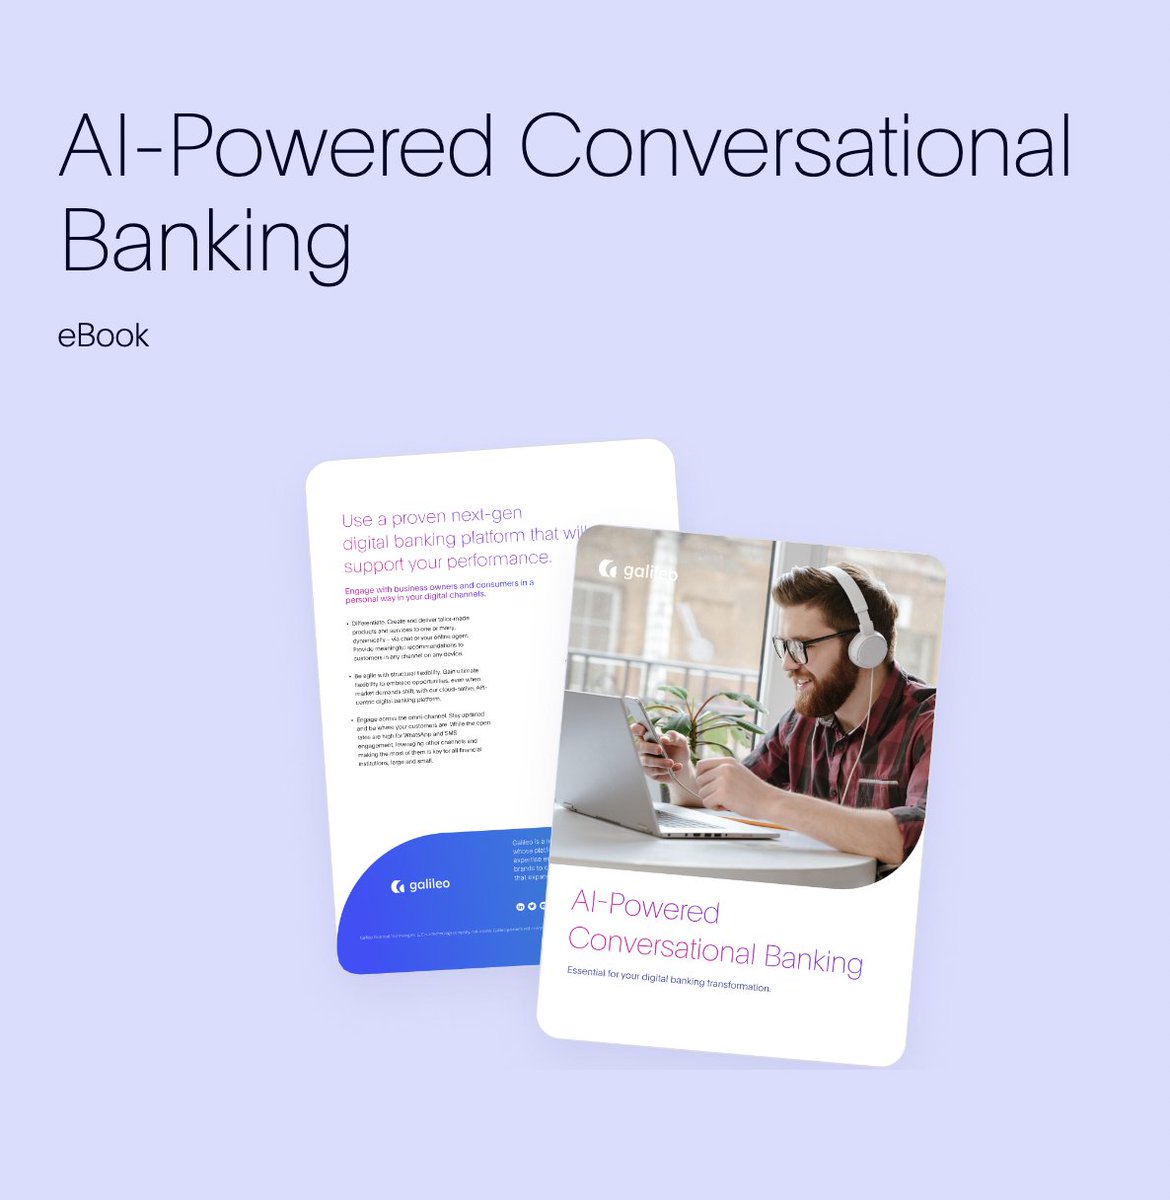 As FIs embrace digital capabilities, how can they support customer conversations better? Learn how you can put this into action. Get your copy of the AI-Powered Conversational Banking guide: bit.ly/3LepjuP 

#AI #digitalbanking #conversationalAI #virtualassistant